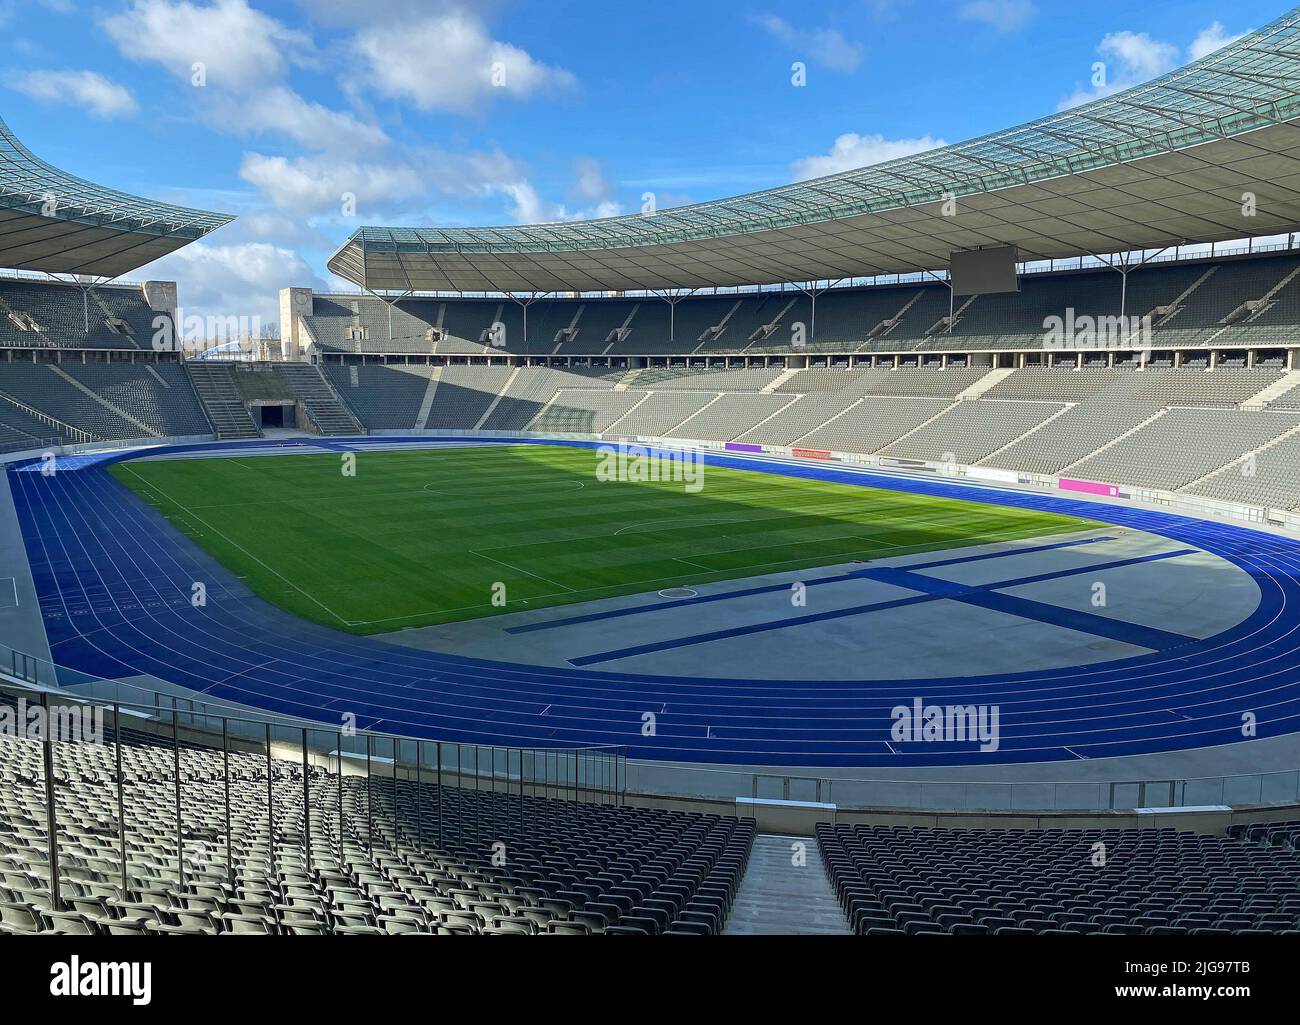 Olympiastadion - Stade olympique, Berlin, Allemagne Banque D'Images